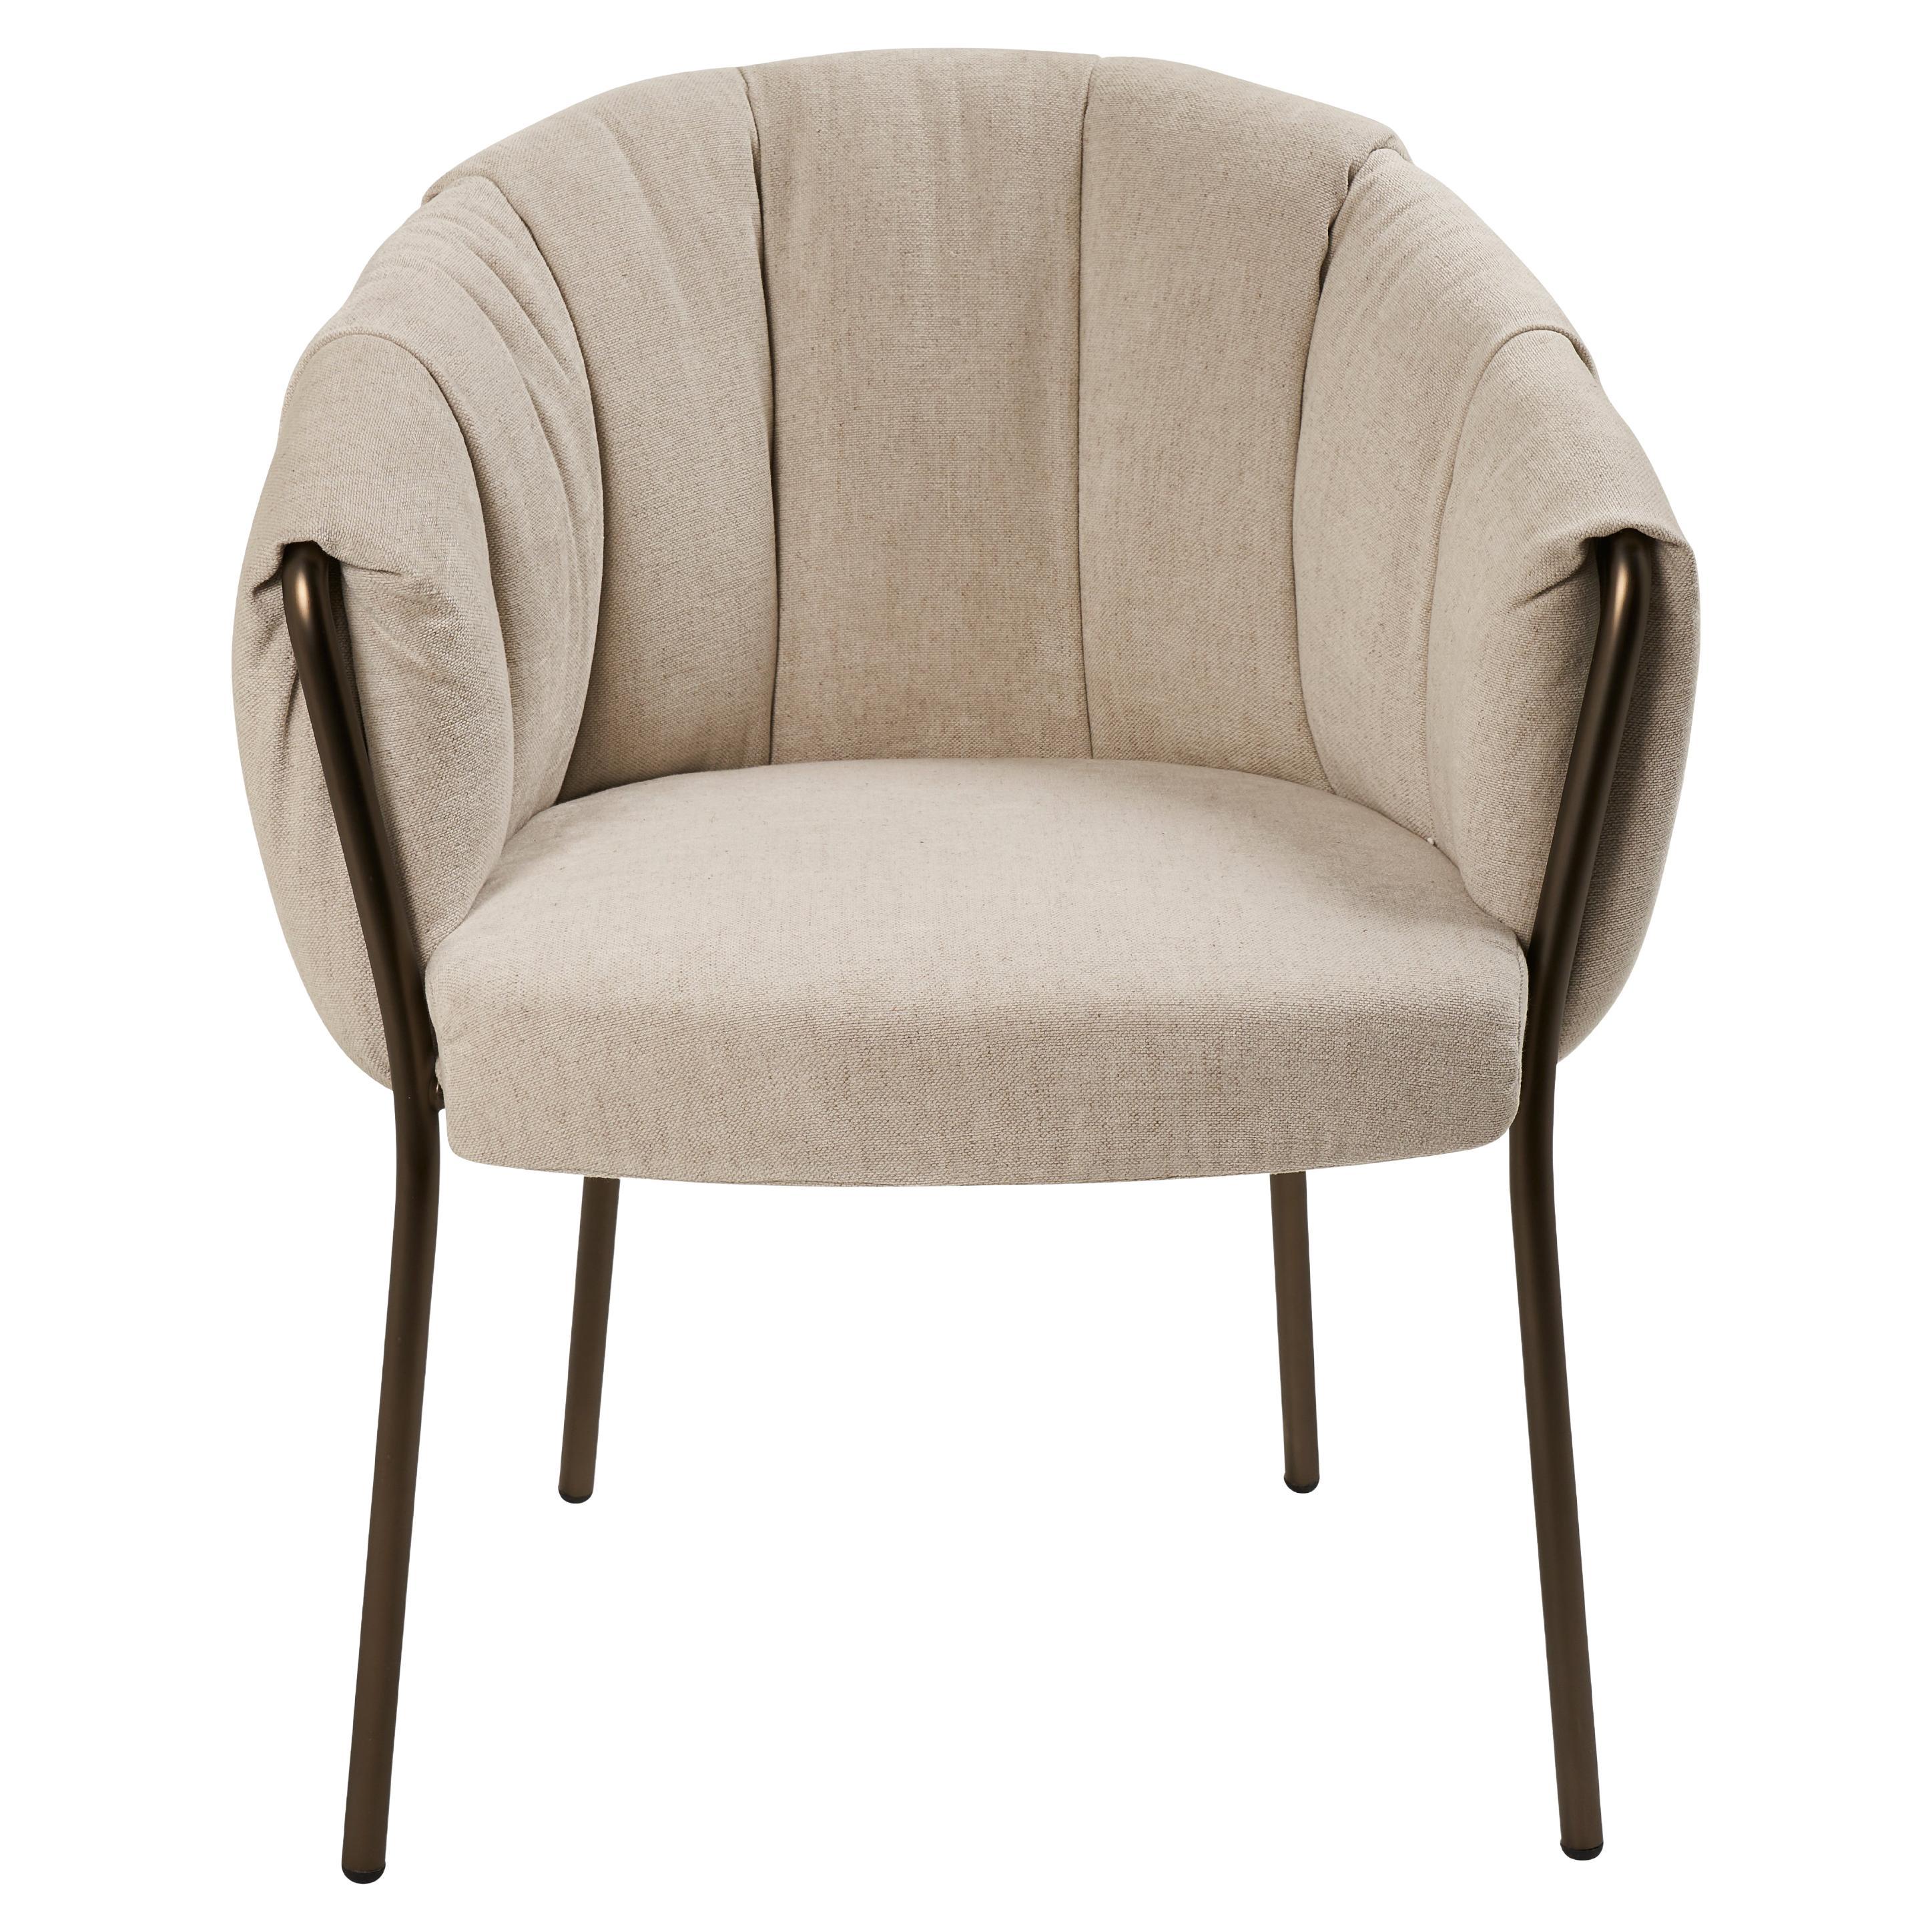 Puffin Dining Chair in Franco Linen Chenille Schumacher Performance Fabric